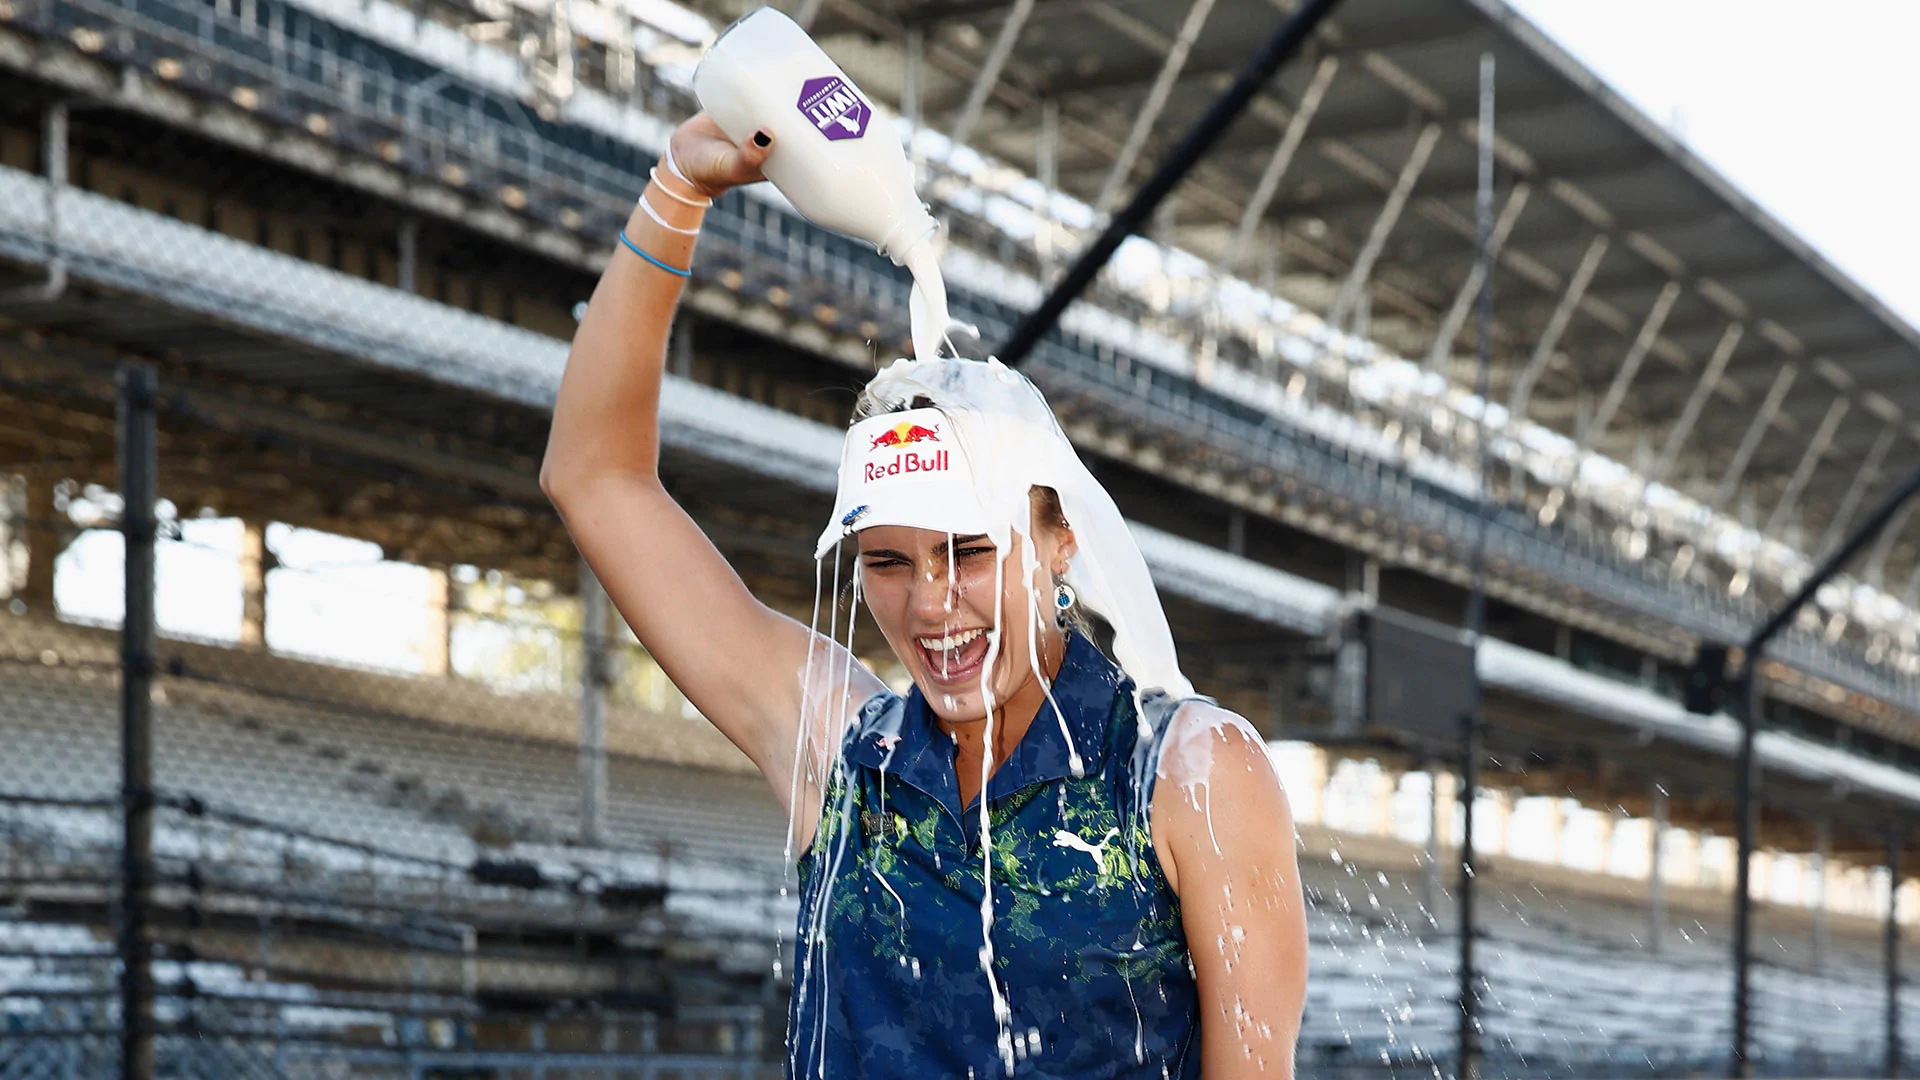 Lexi drinks milk, kisses bricks after Indy victory